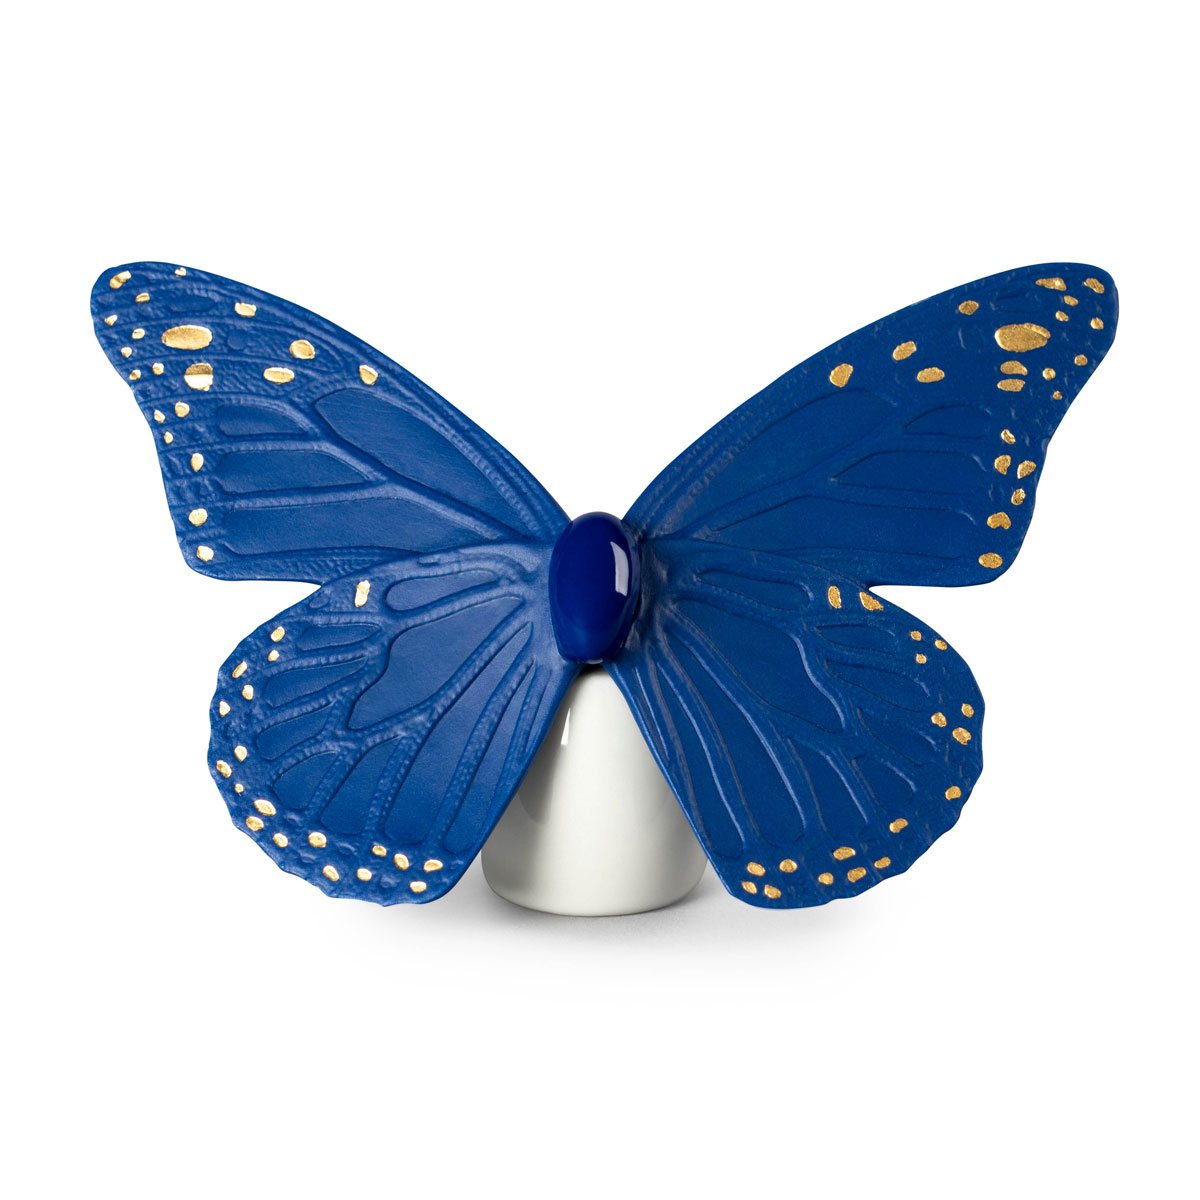 Lladro Classic Sculpture, Butterfly Figurine. Golden Luster And Blue